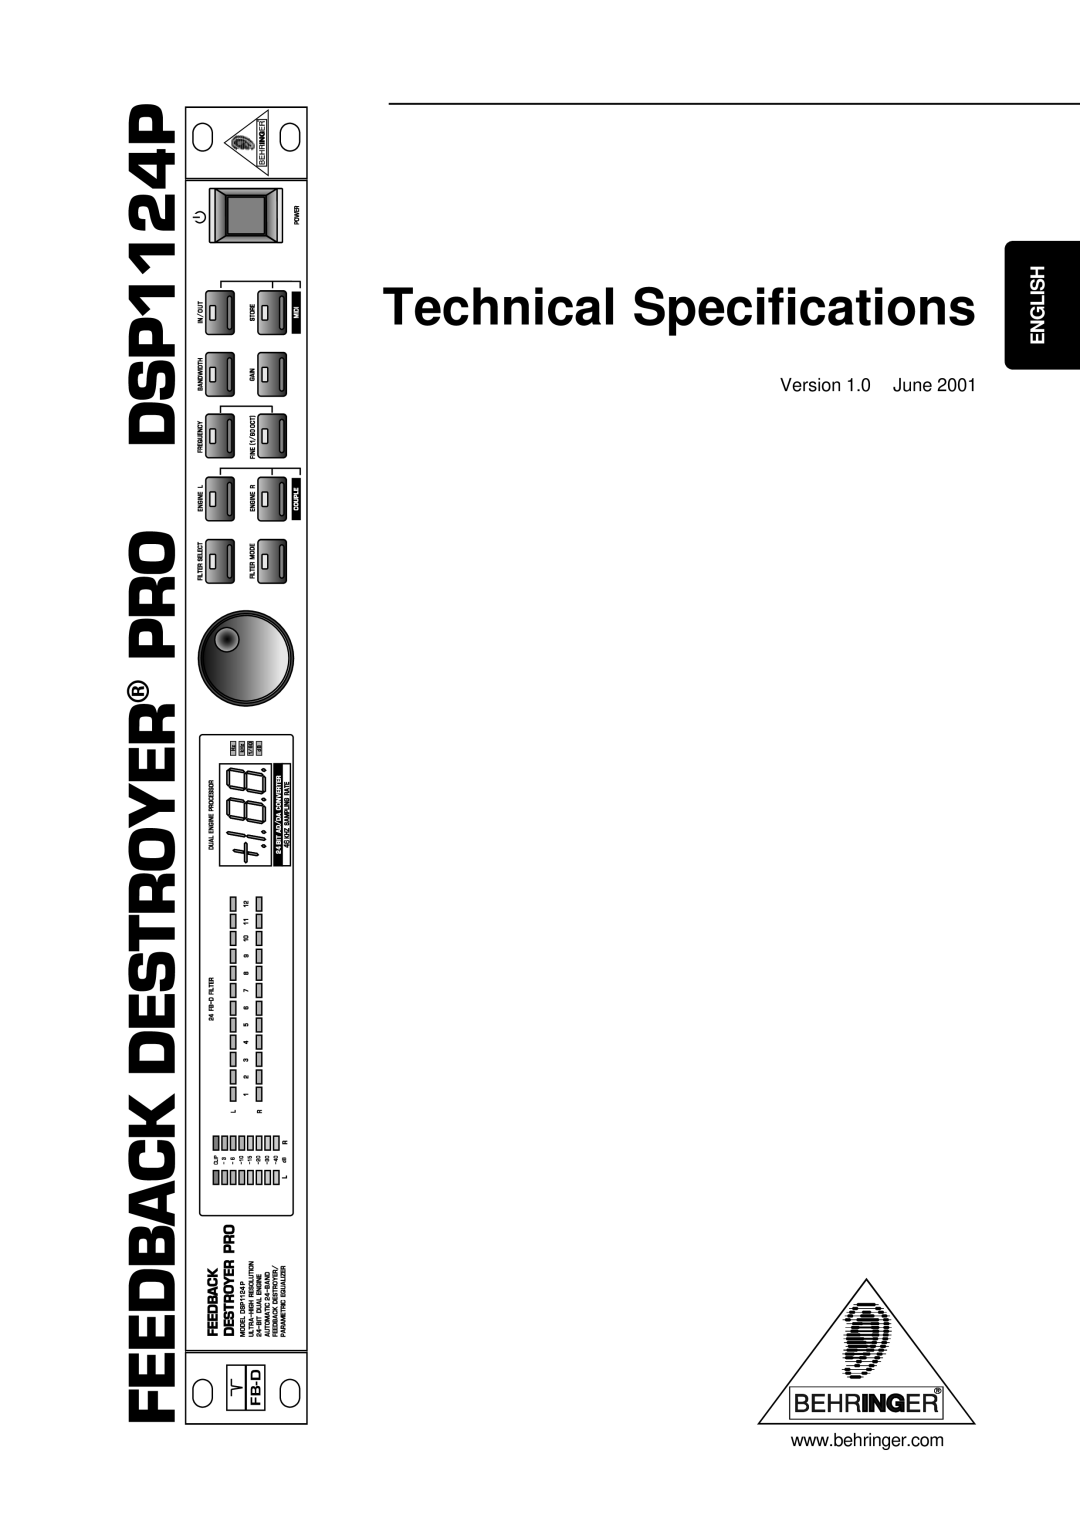 Behringer dsp1124p technical specifications DSP1124P, Destroyer Pro, Feedback, Technical Specifications, English 